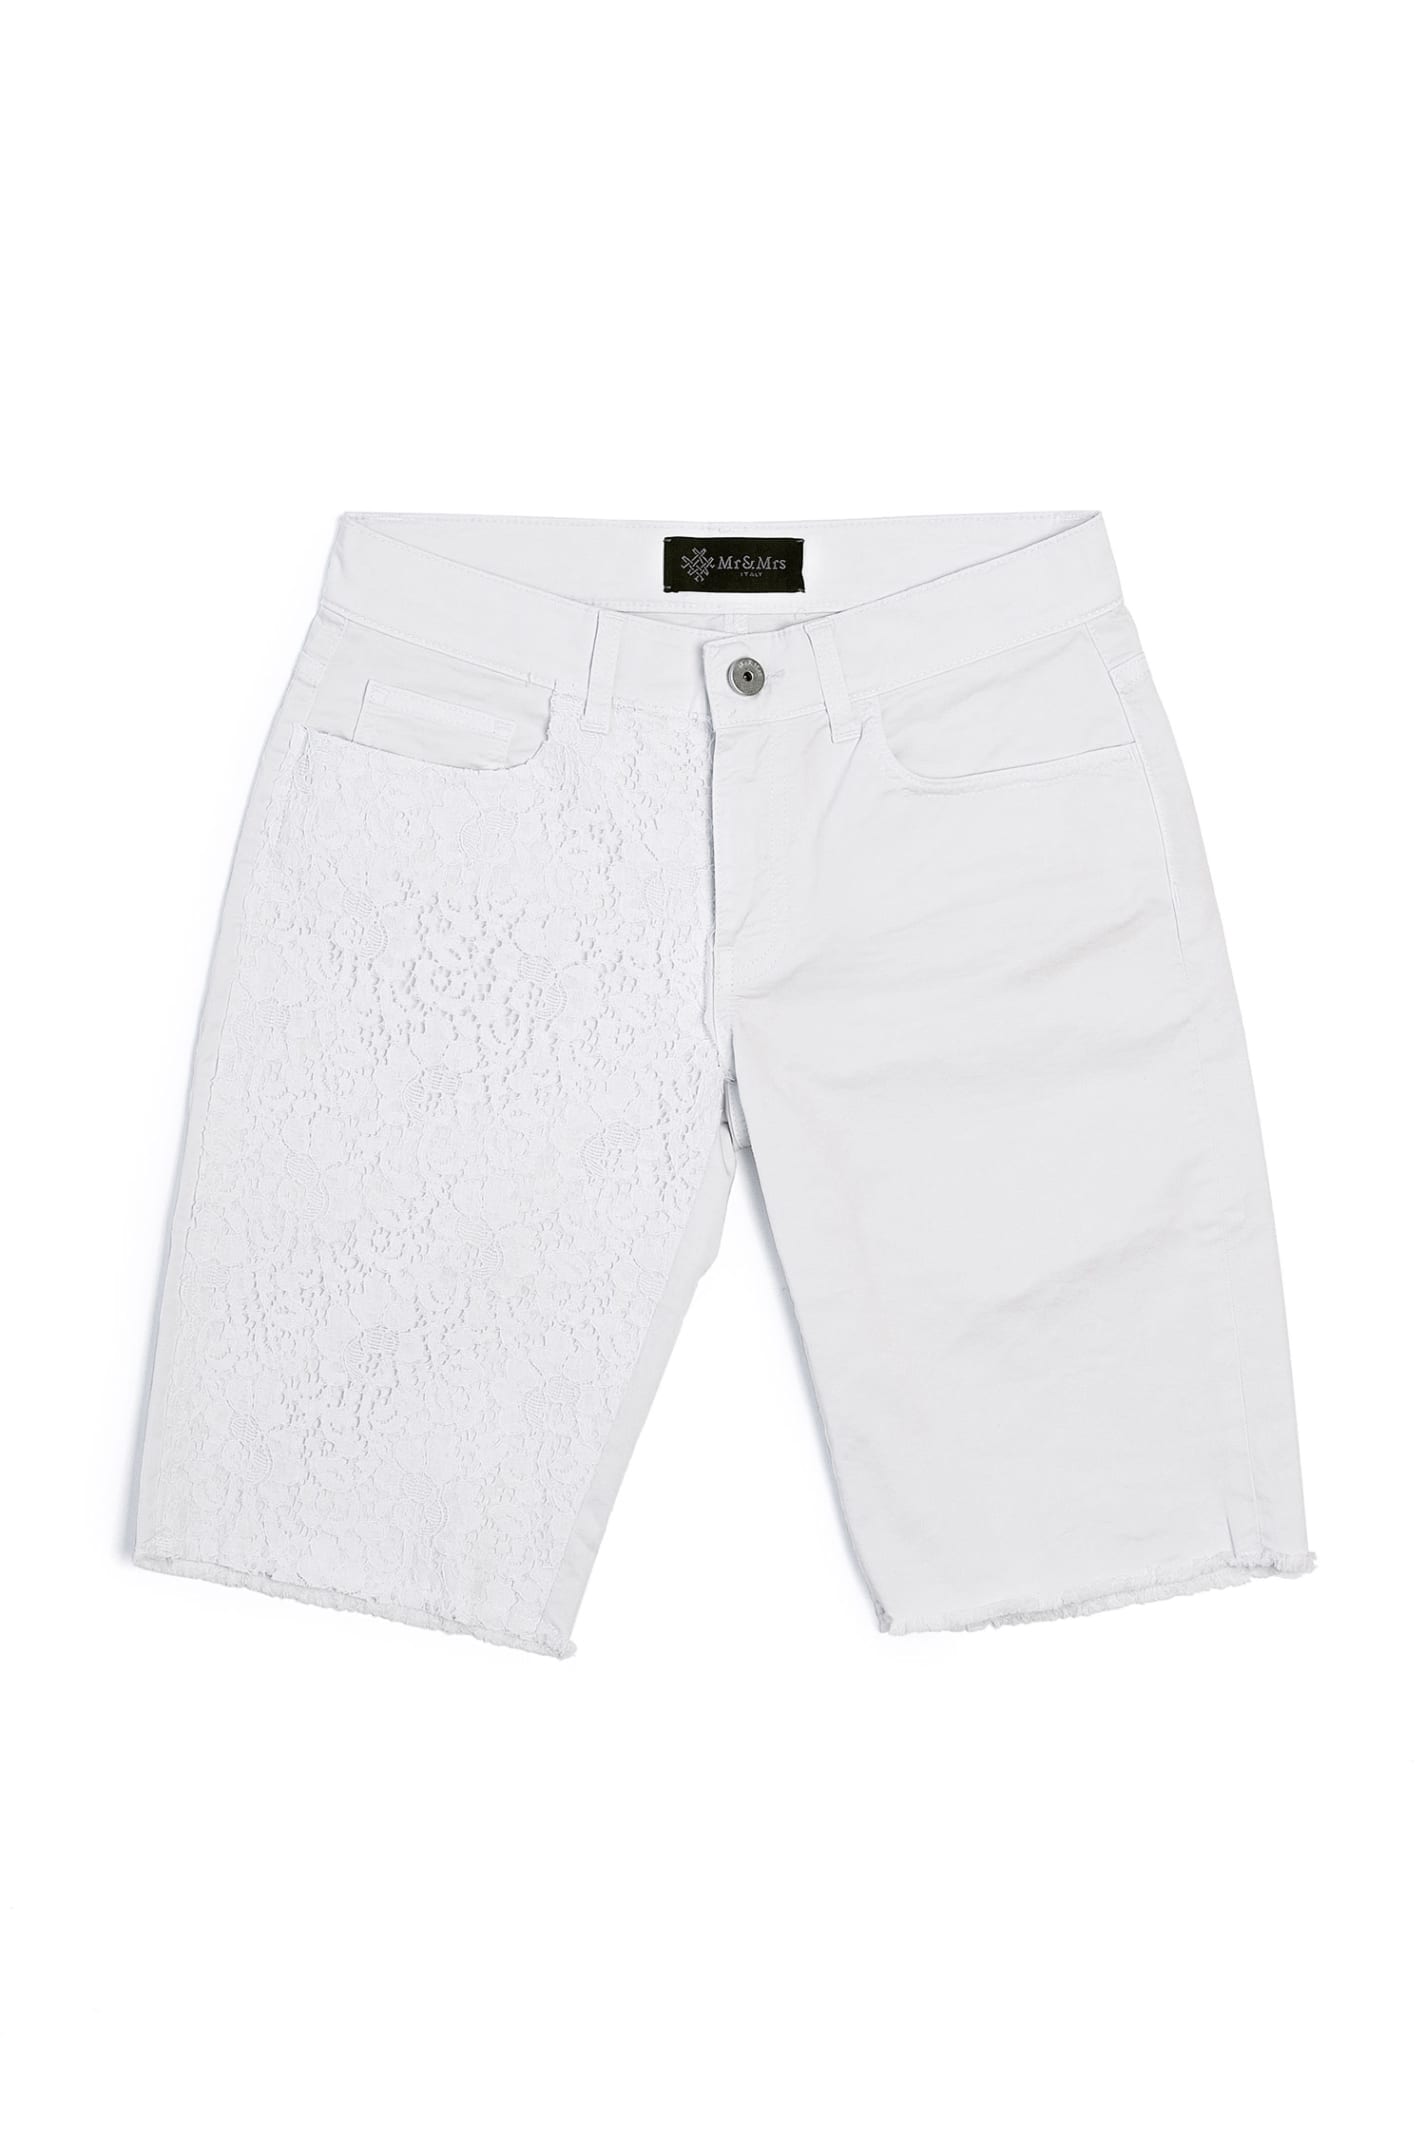 Mr & Mrs Italy White Lace Boyfriend Shorts For Woman